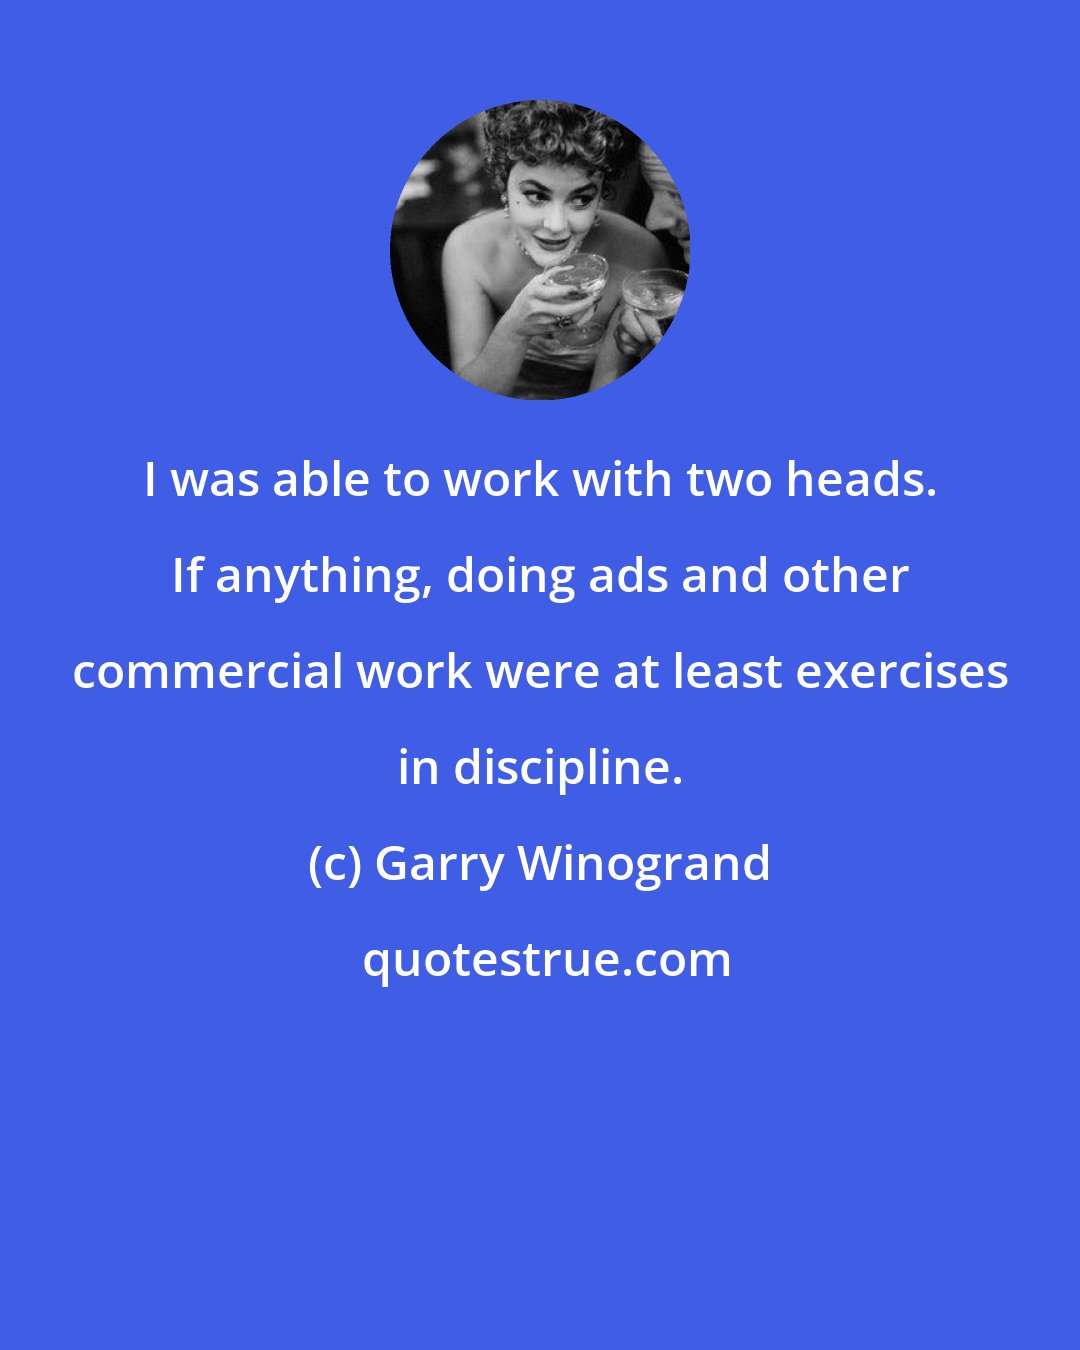 Garry Winogrand: I was able to work with two heads. If anything, doing ads and other commercial work were at least exercises in discipline.